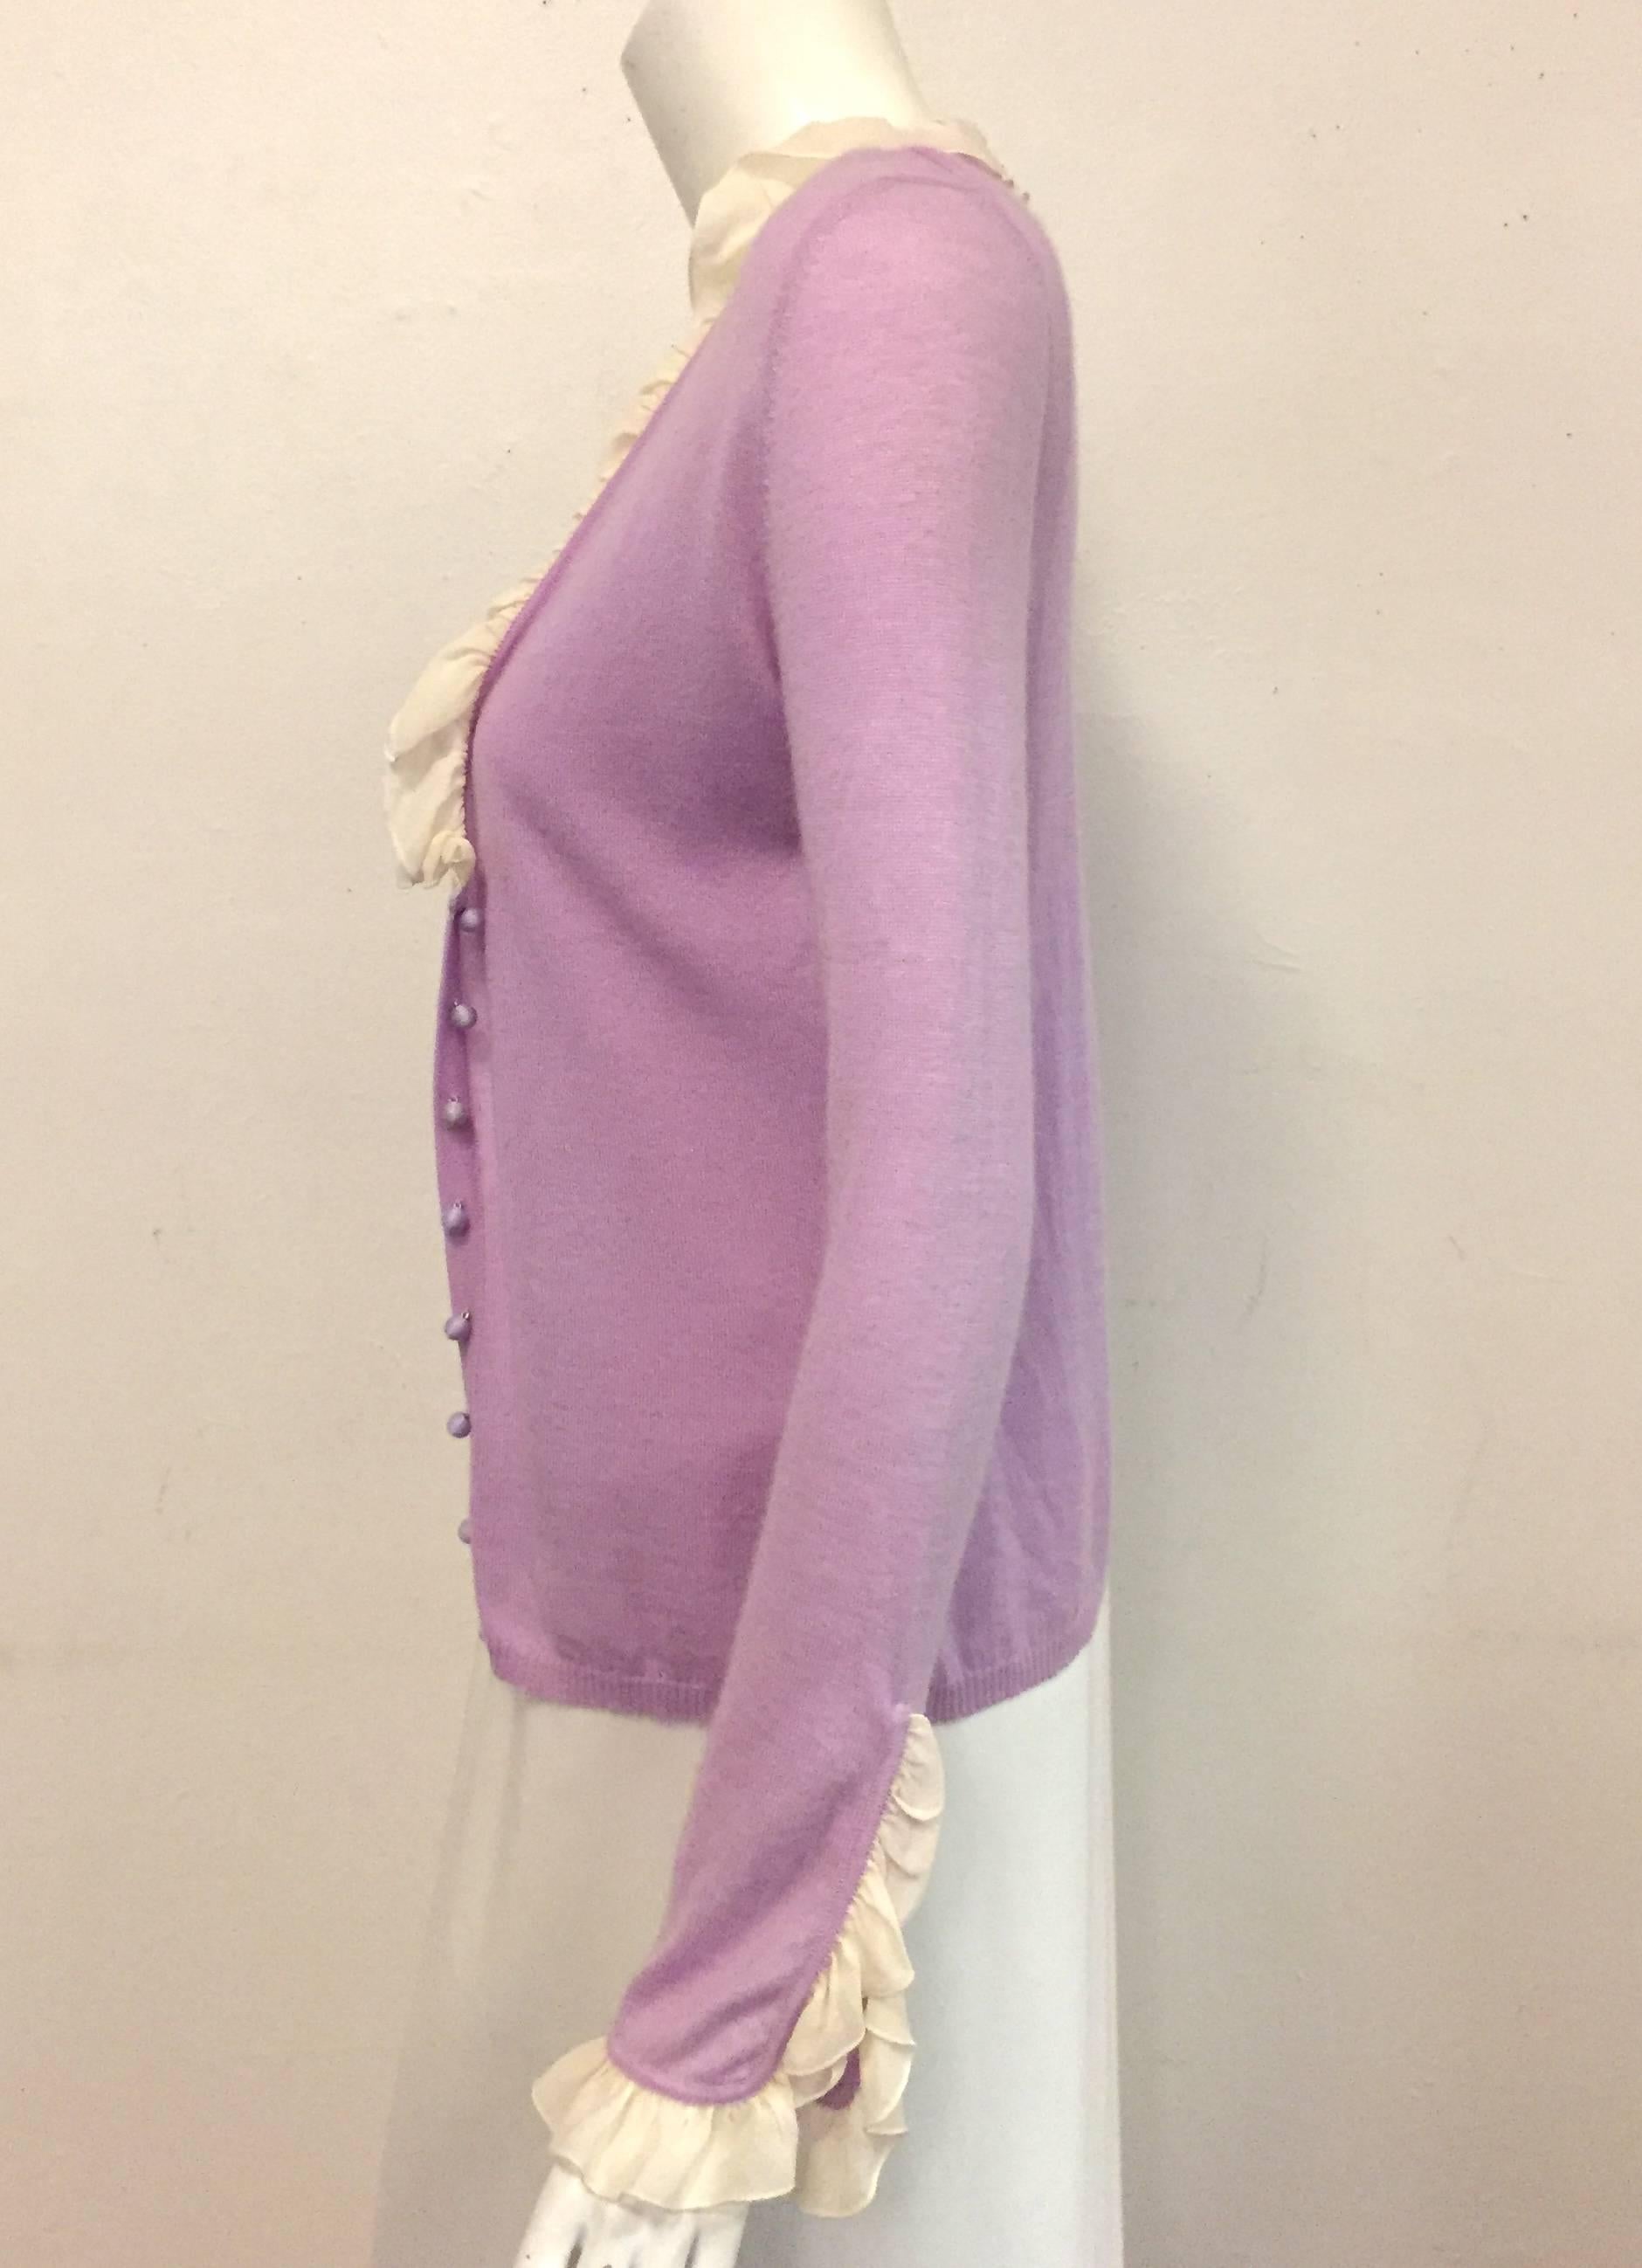 Emanuel Ungaro  lavender and beige 2 piece ensemble that includes a camisole and a cardigan with ruffles.  This twinset has no composition tag but fabric appears to be cashmere and silk crepe.  Small round thread buttons are used for closure at